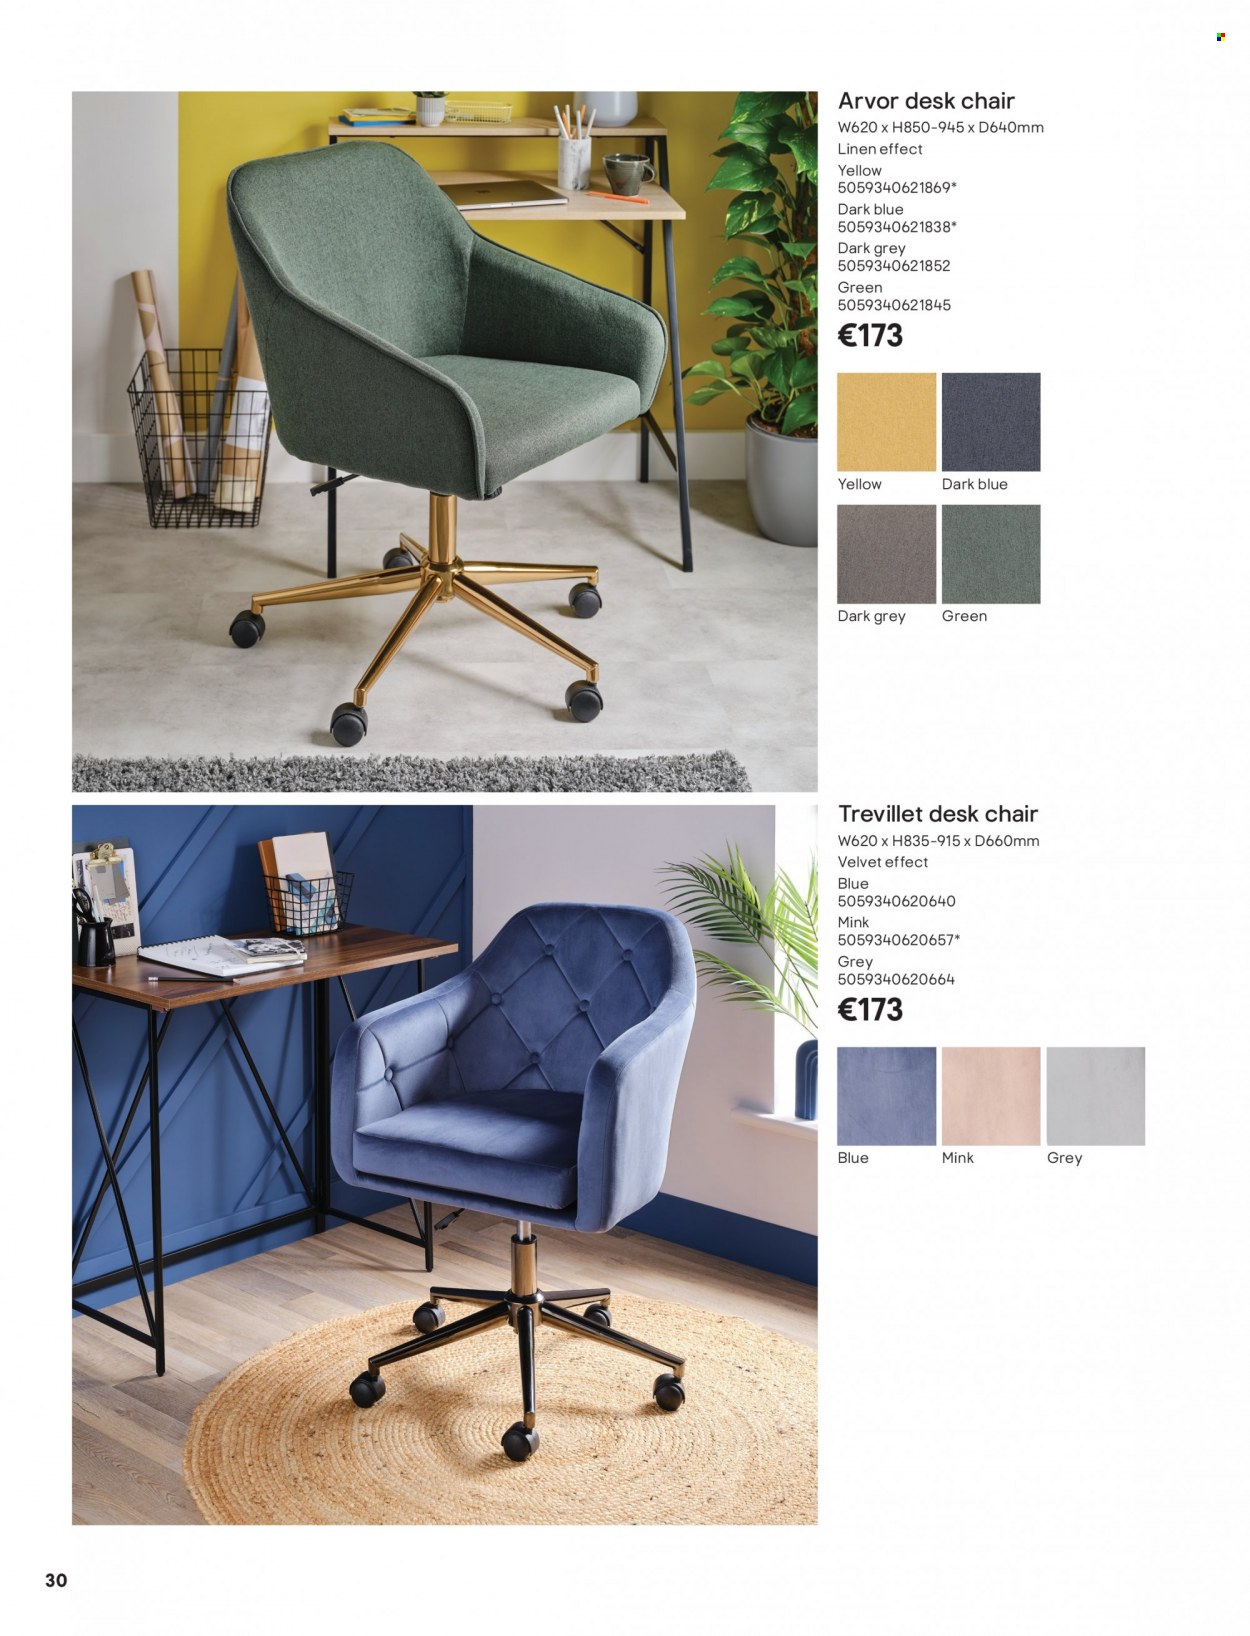 thumbnail - B&Q offer  - Sales products - chair, desk, linens. Page 30.